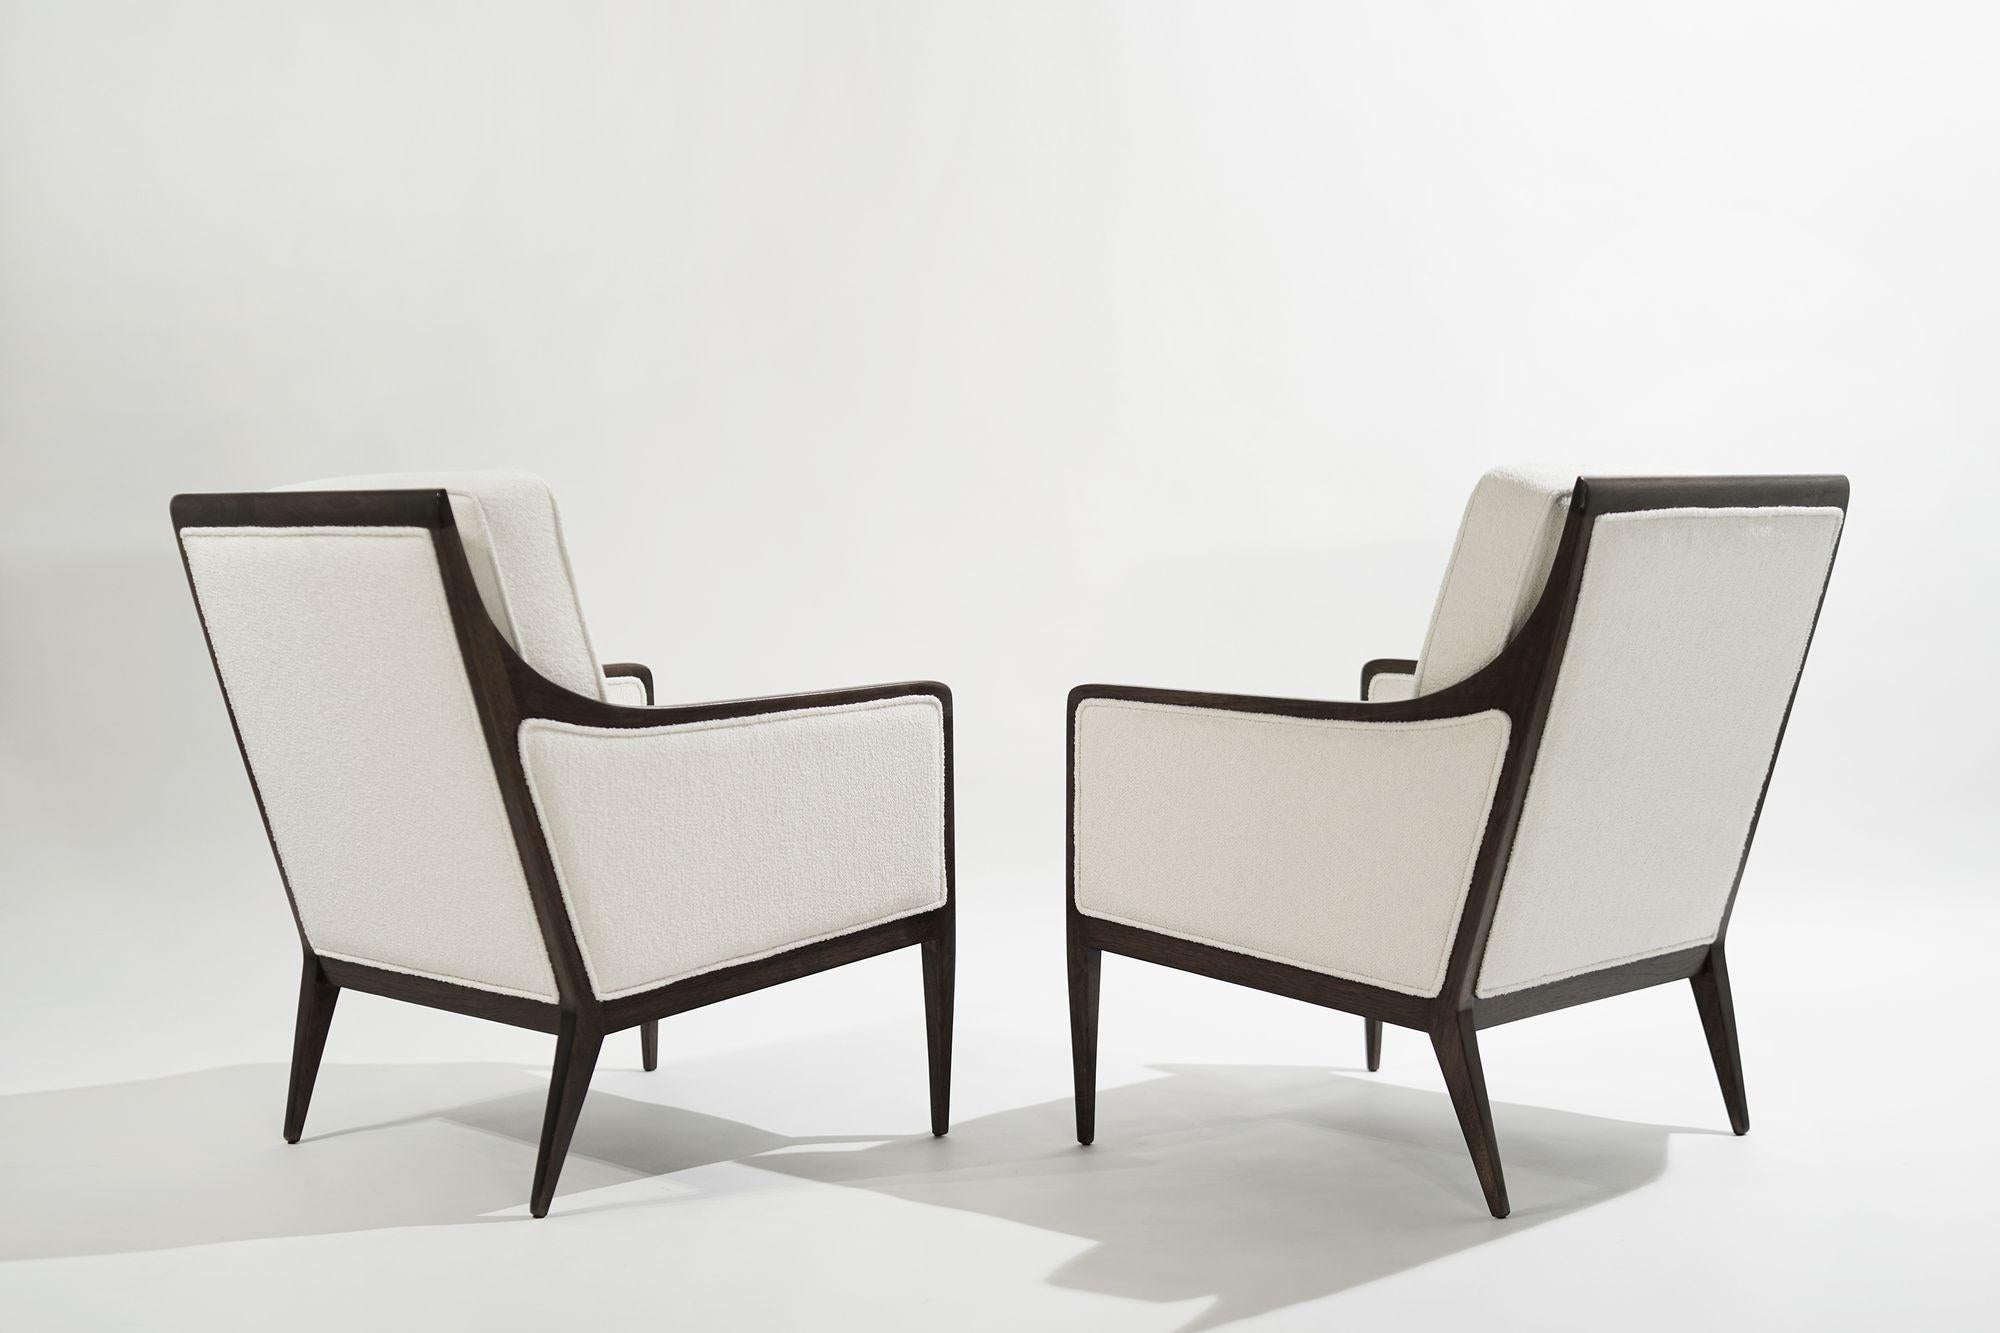 American Set of Lounge Chairs by Milo Baughman, Country Village Collection, C. 1950s For Sale